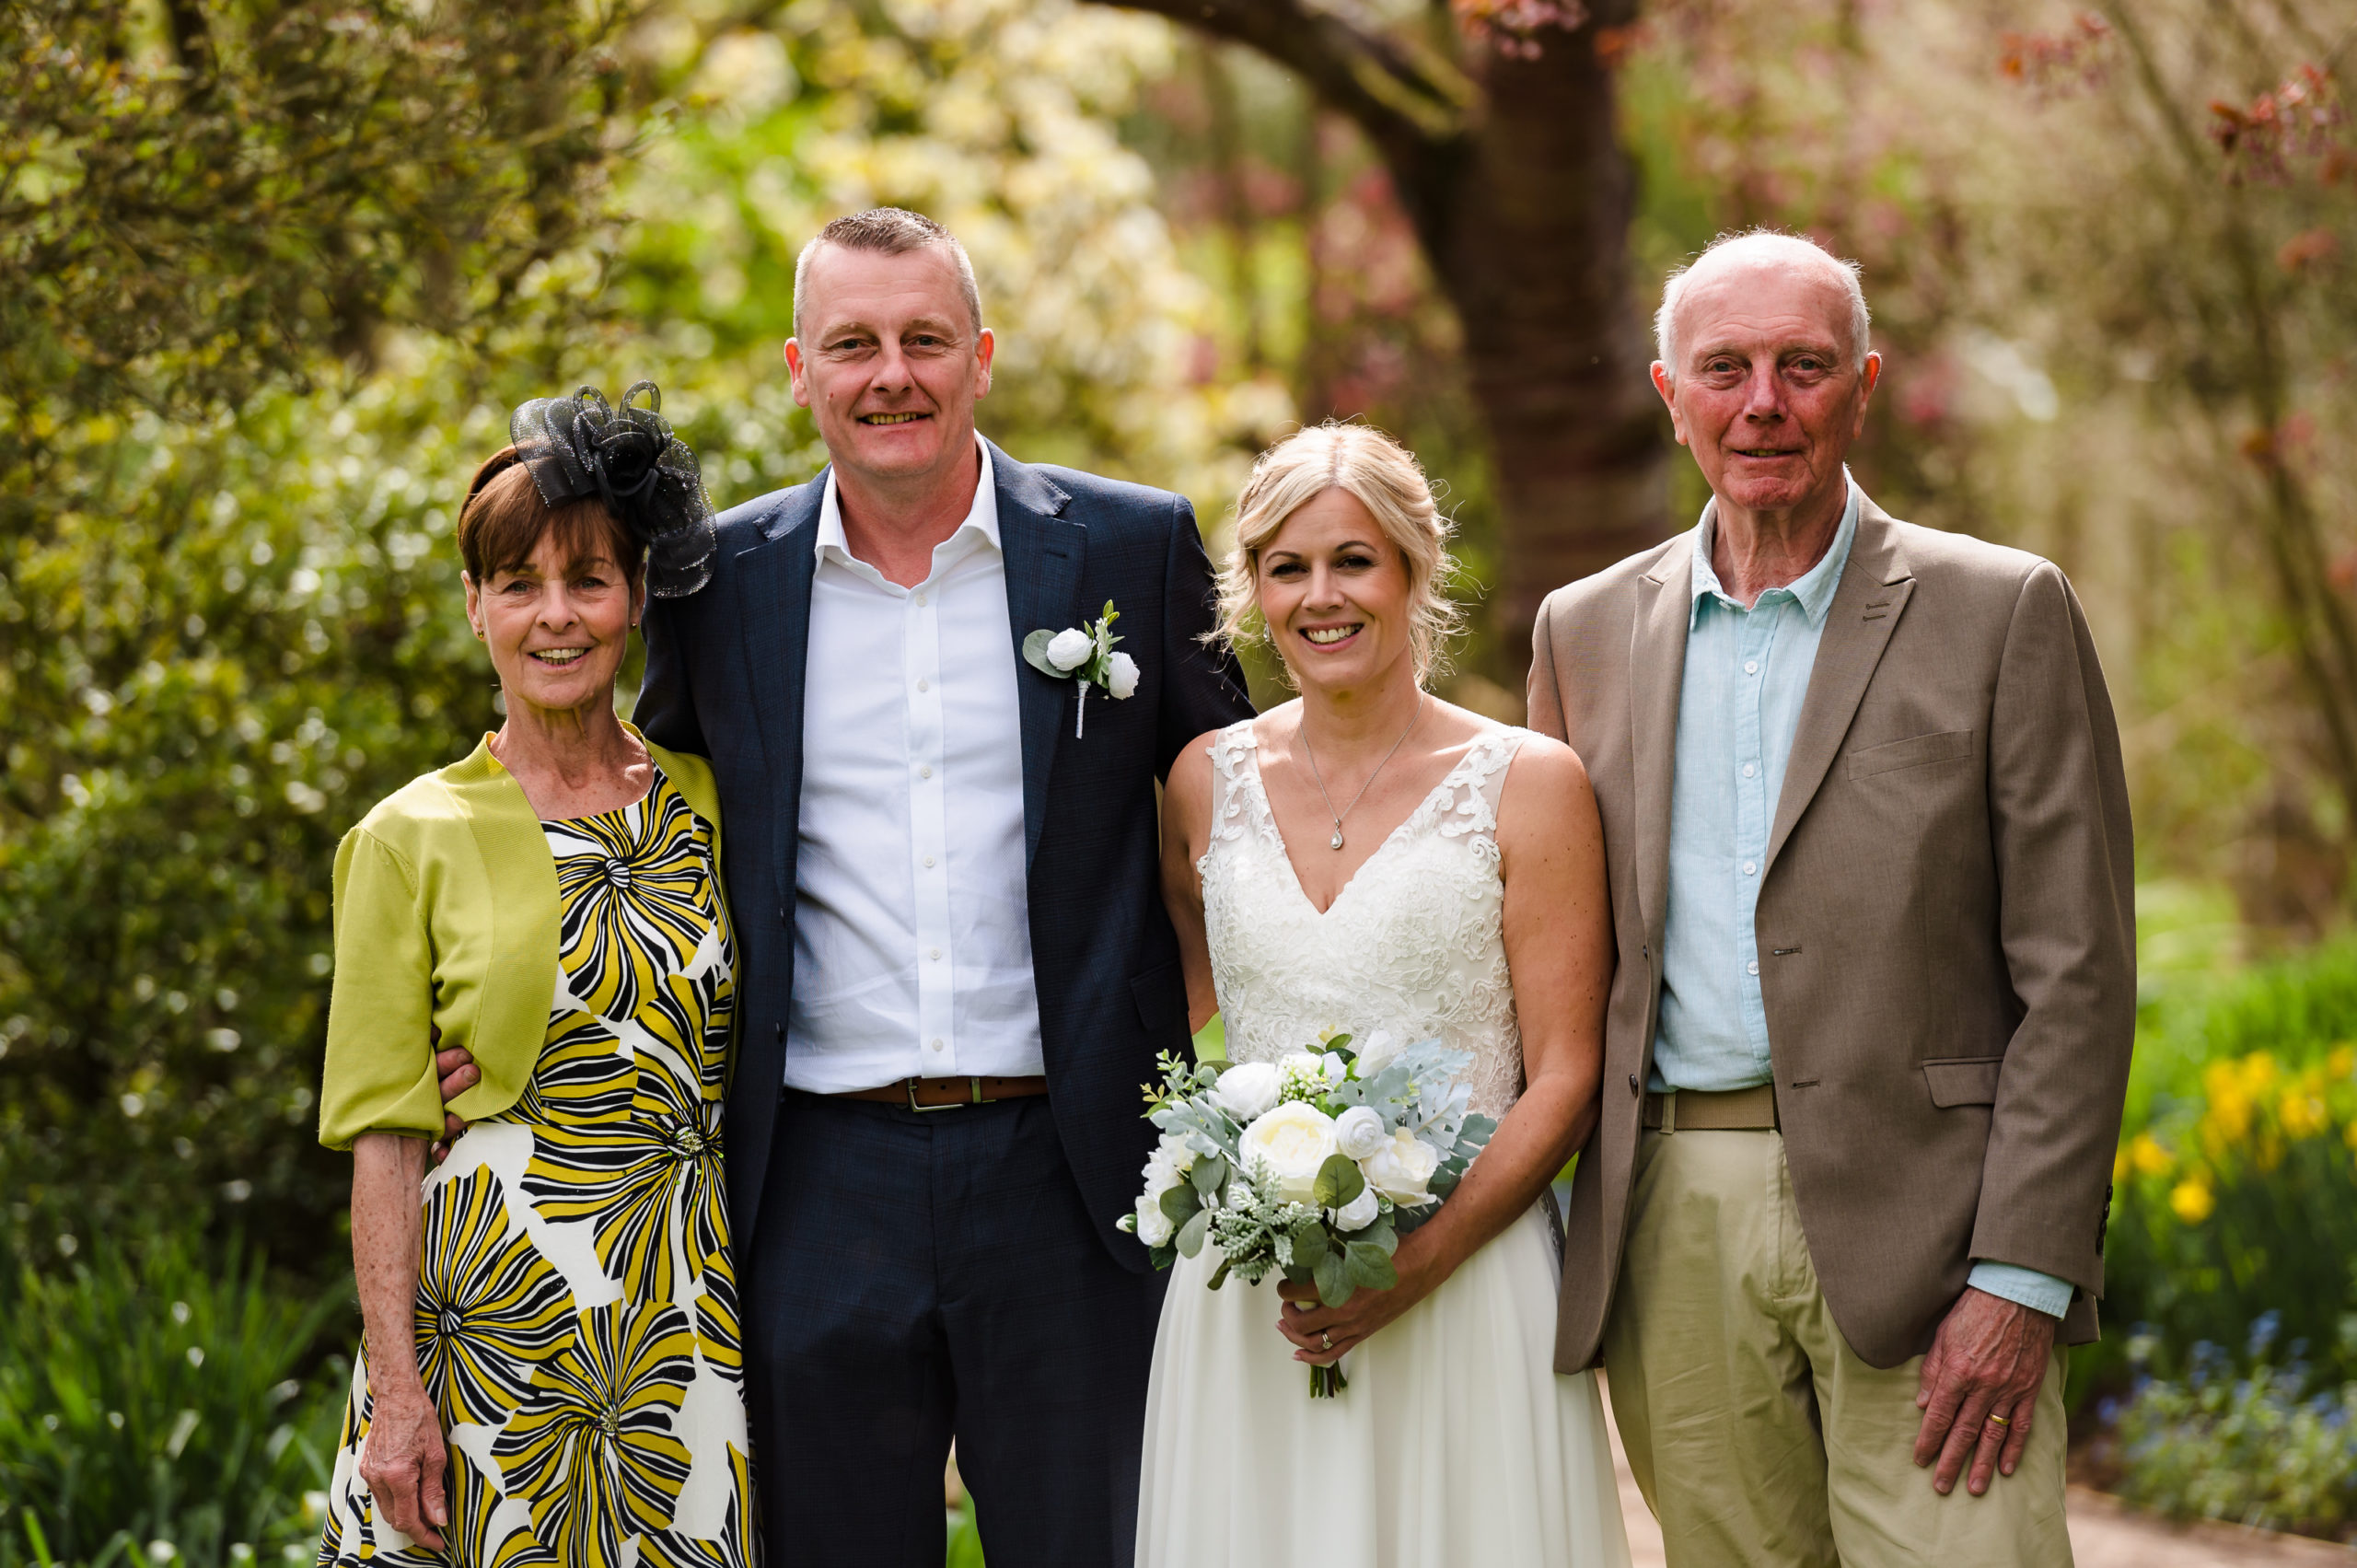 Family wedding photo at barnsdale gardens